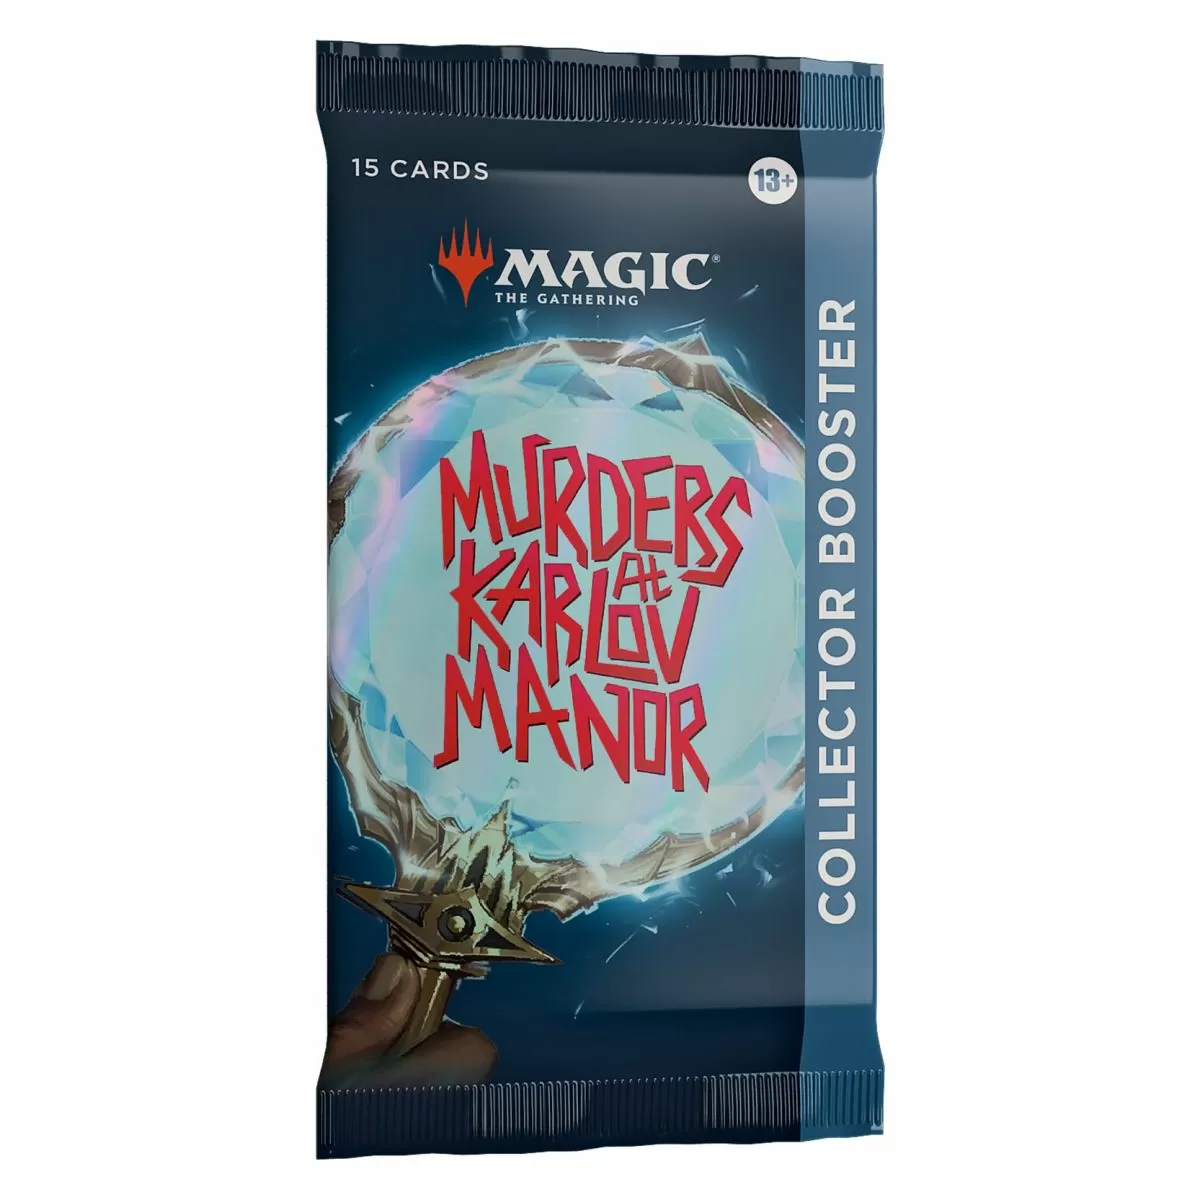 First Look! Murders at Karlov Manor Triple Collector Box Opening! Feb 9  Full Release 